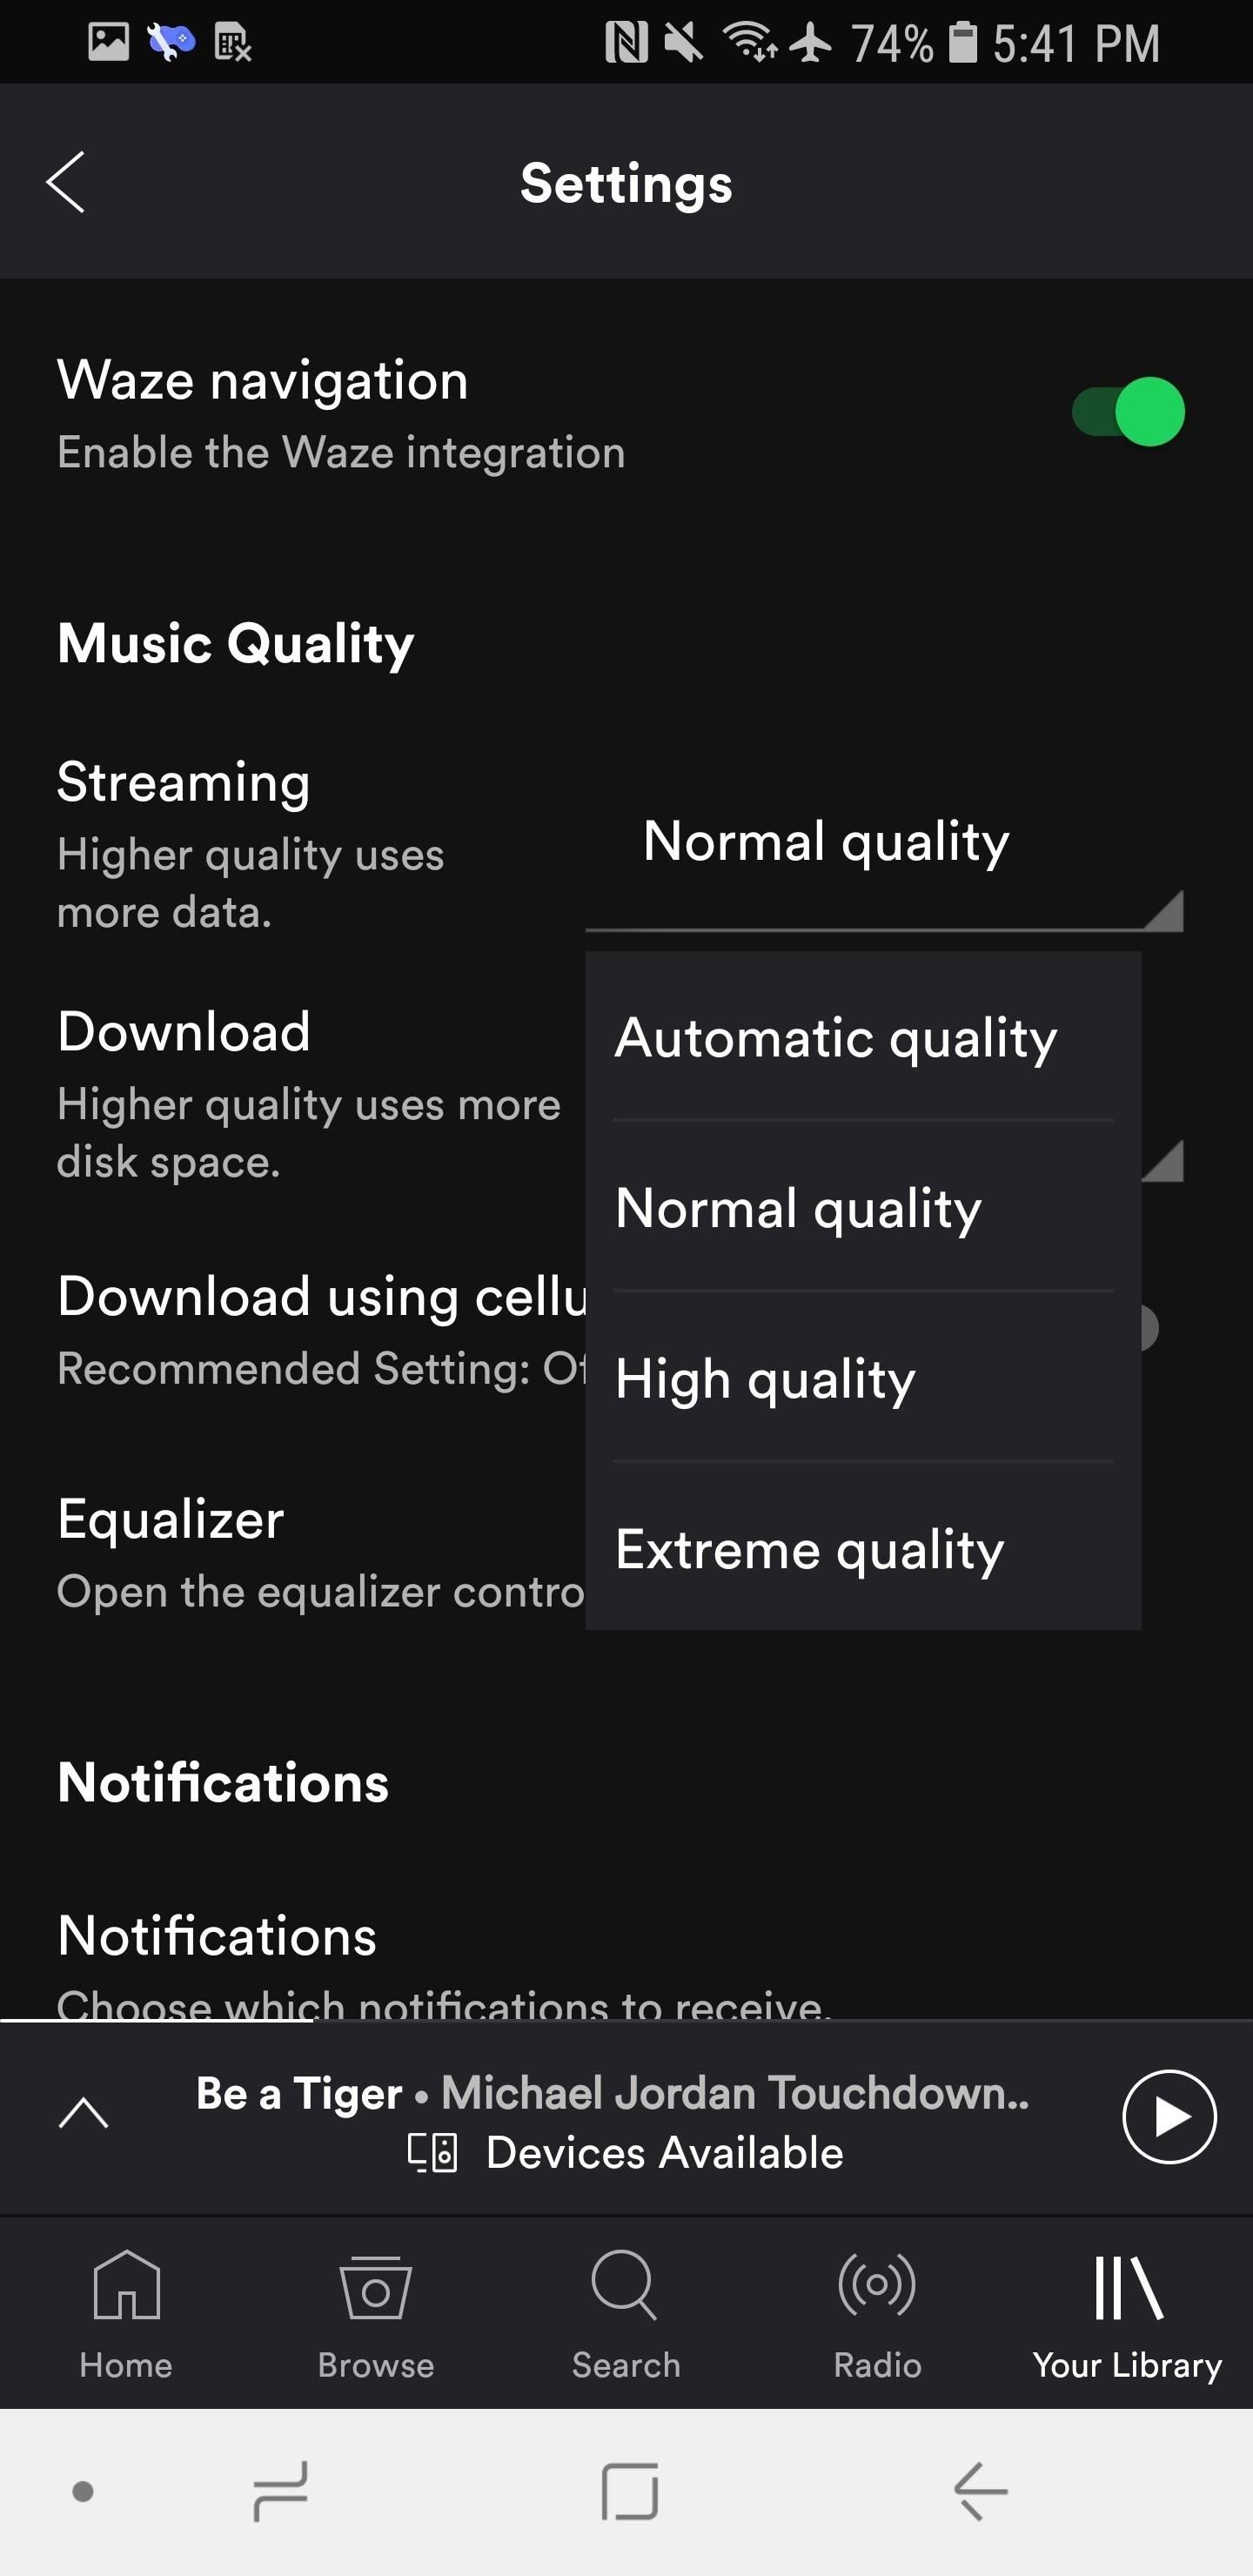 Spotify 101: How to Save Cellular Data When Streaming Music on Your iPhone or Android Phone